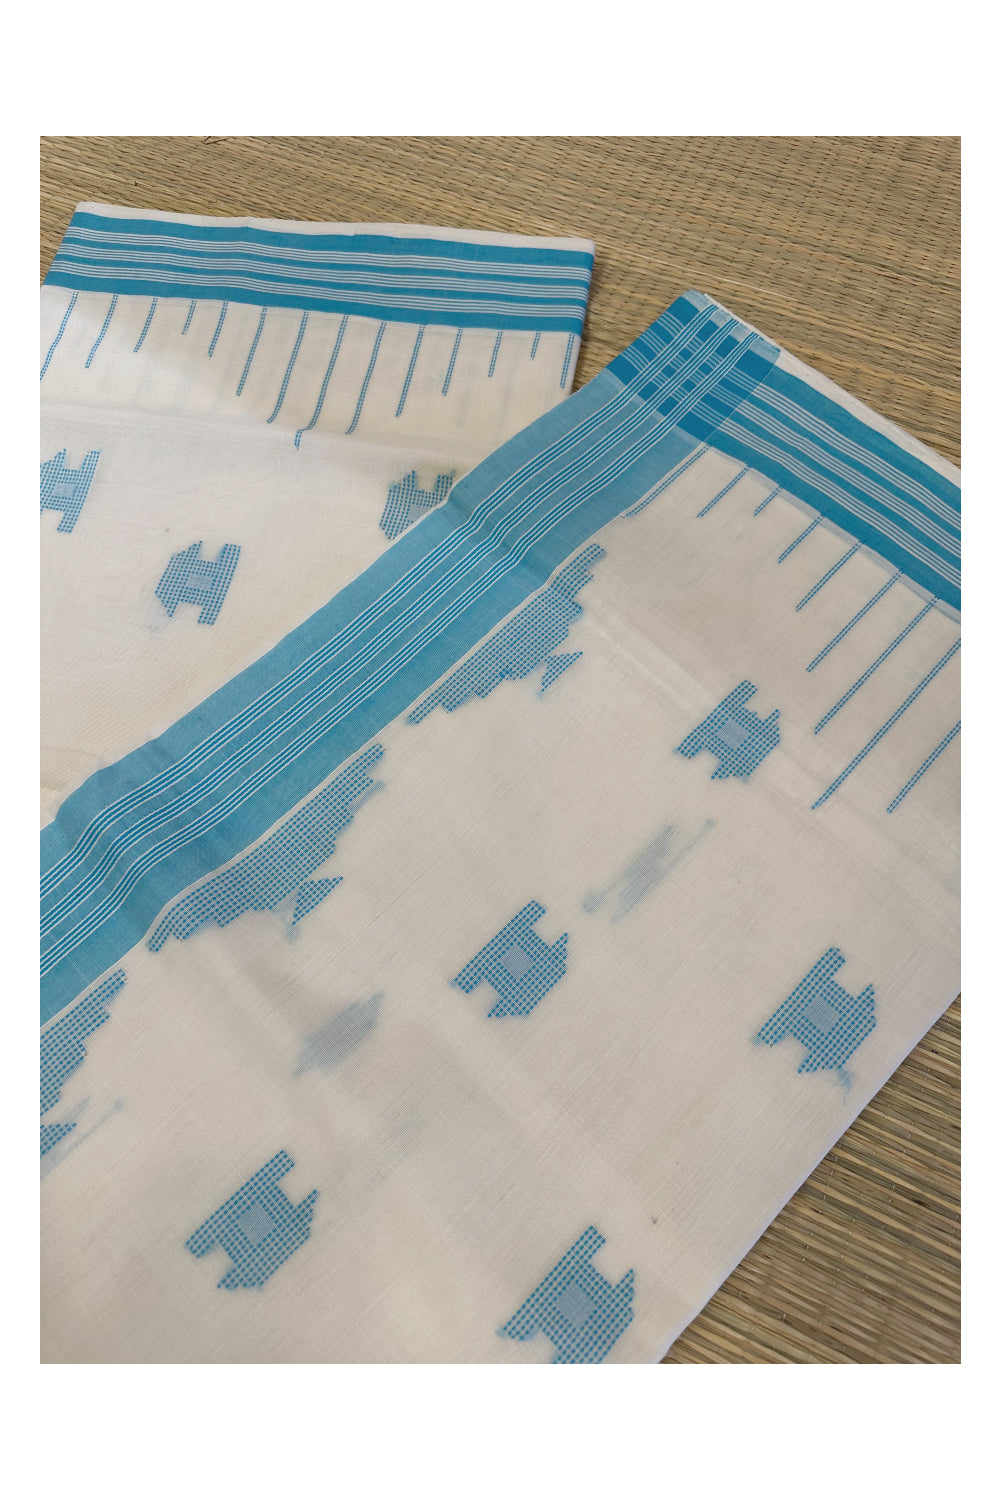 Southloom Kuthampully Handloom Onam 2023 Saree with Blue Border and Butta Works